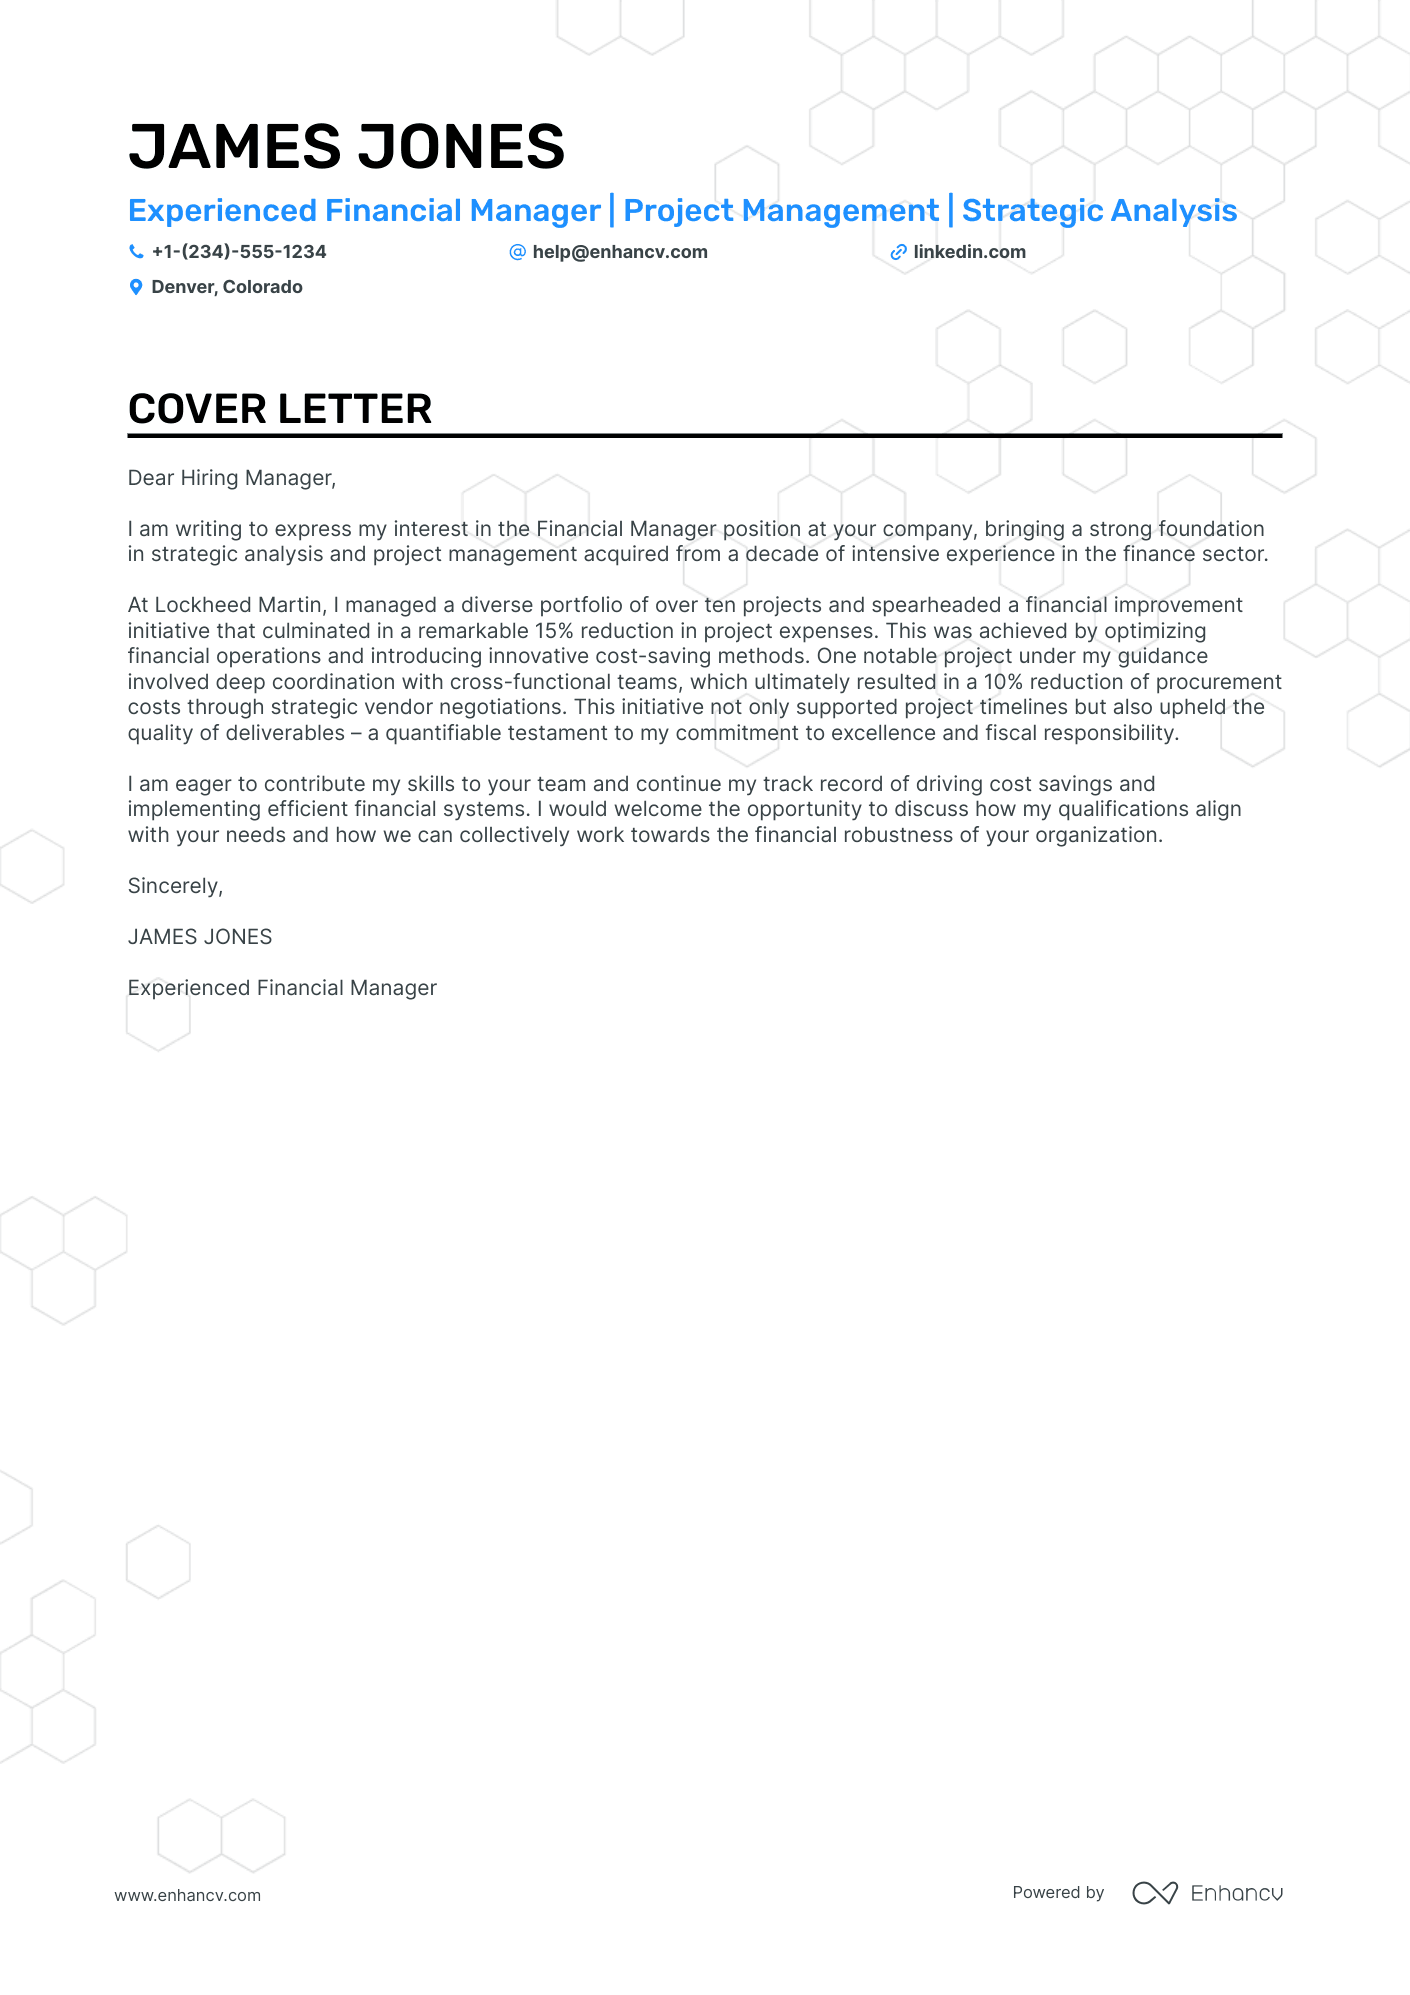 Customer Account Manager cover letter